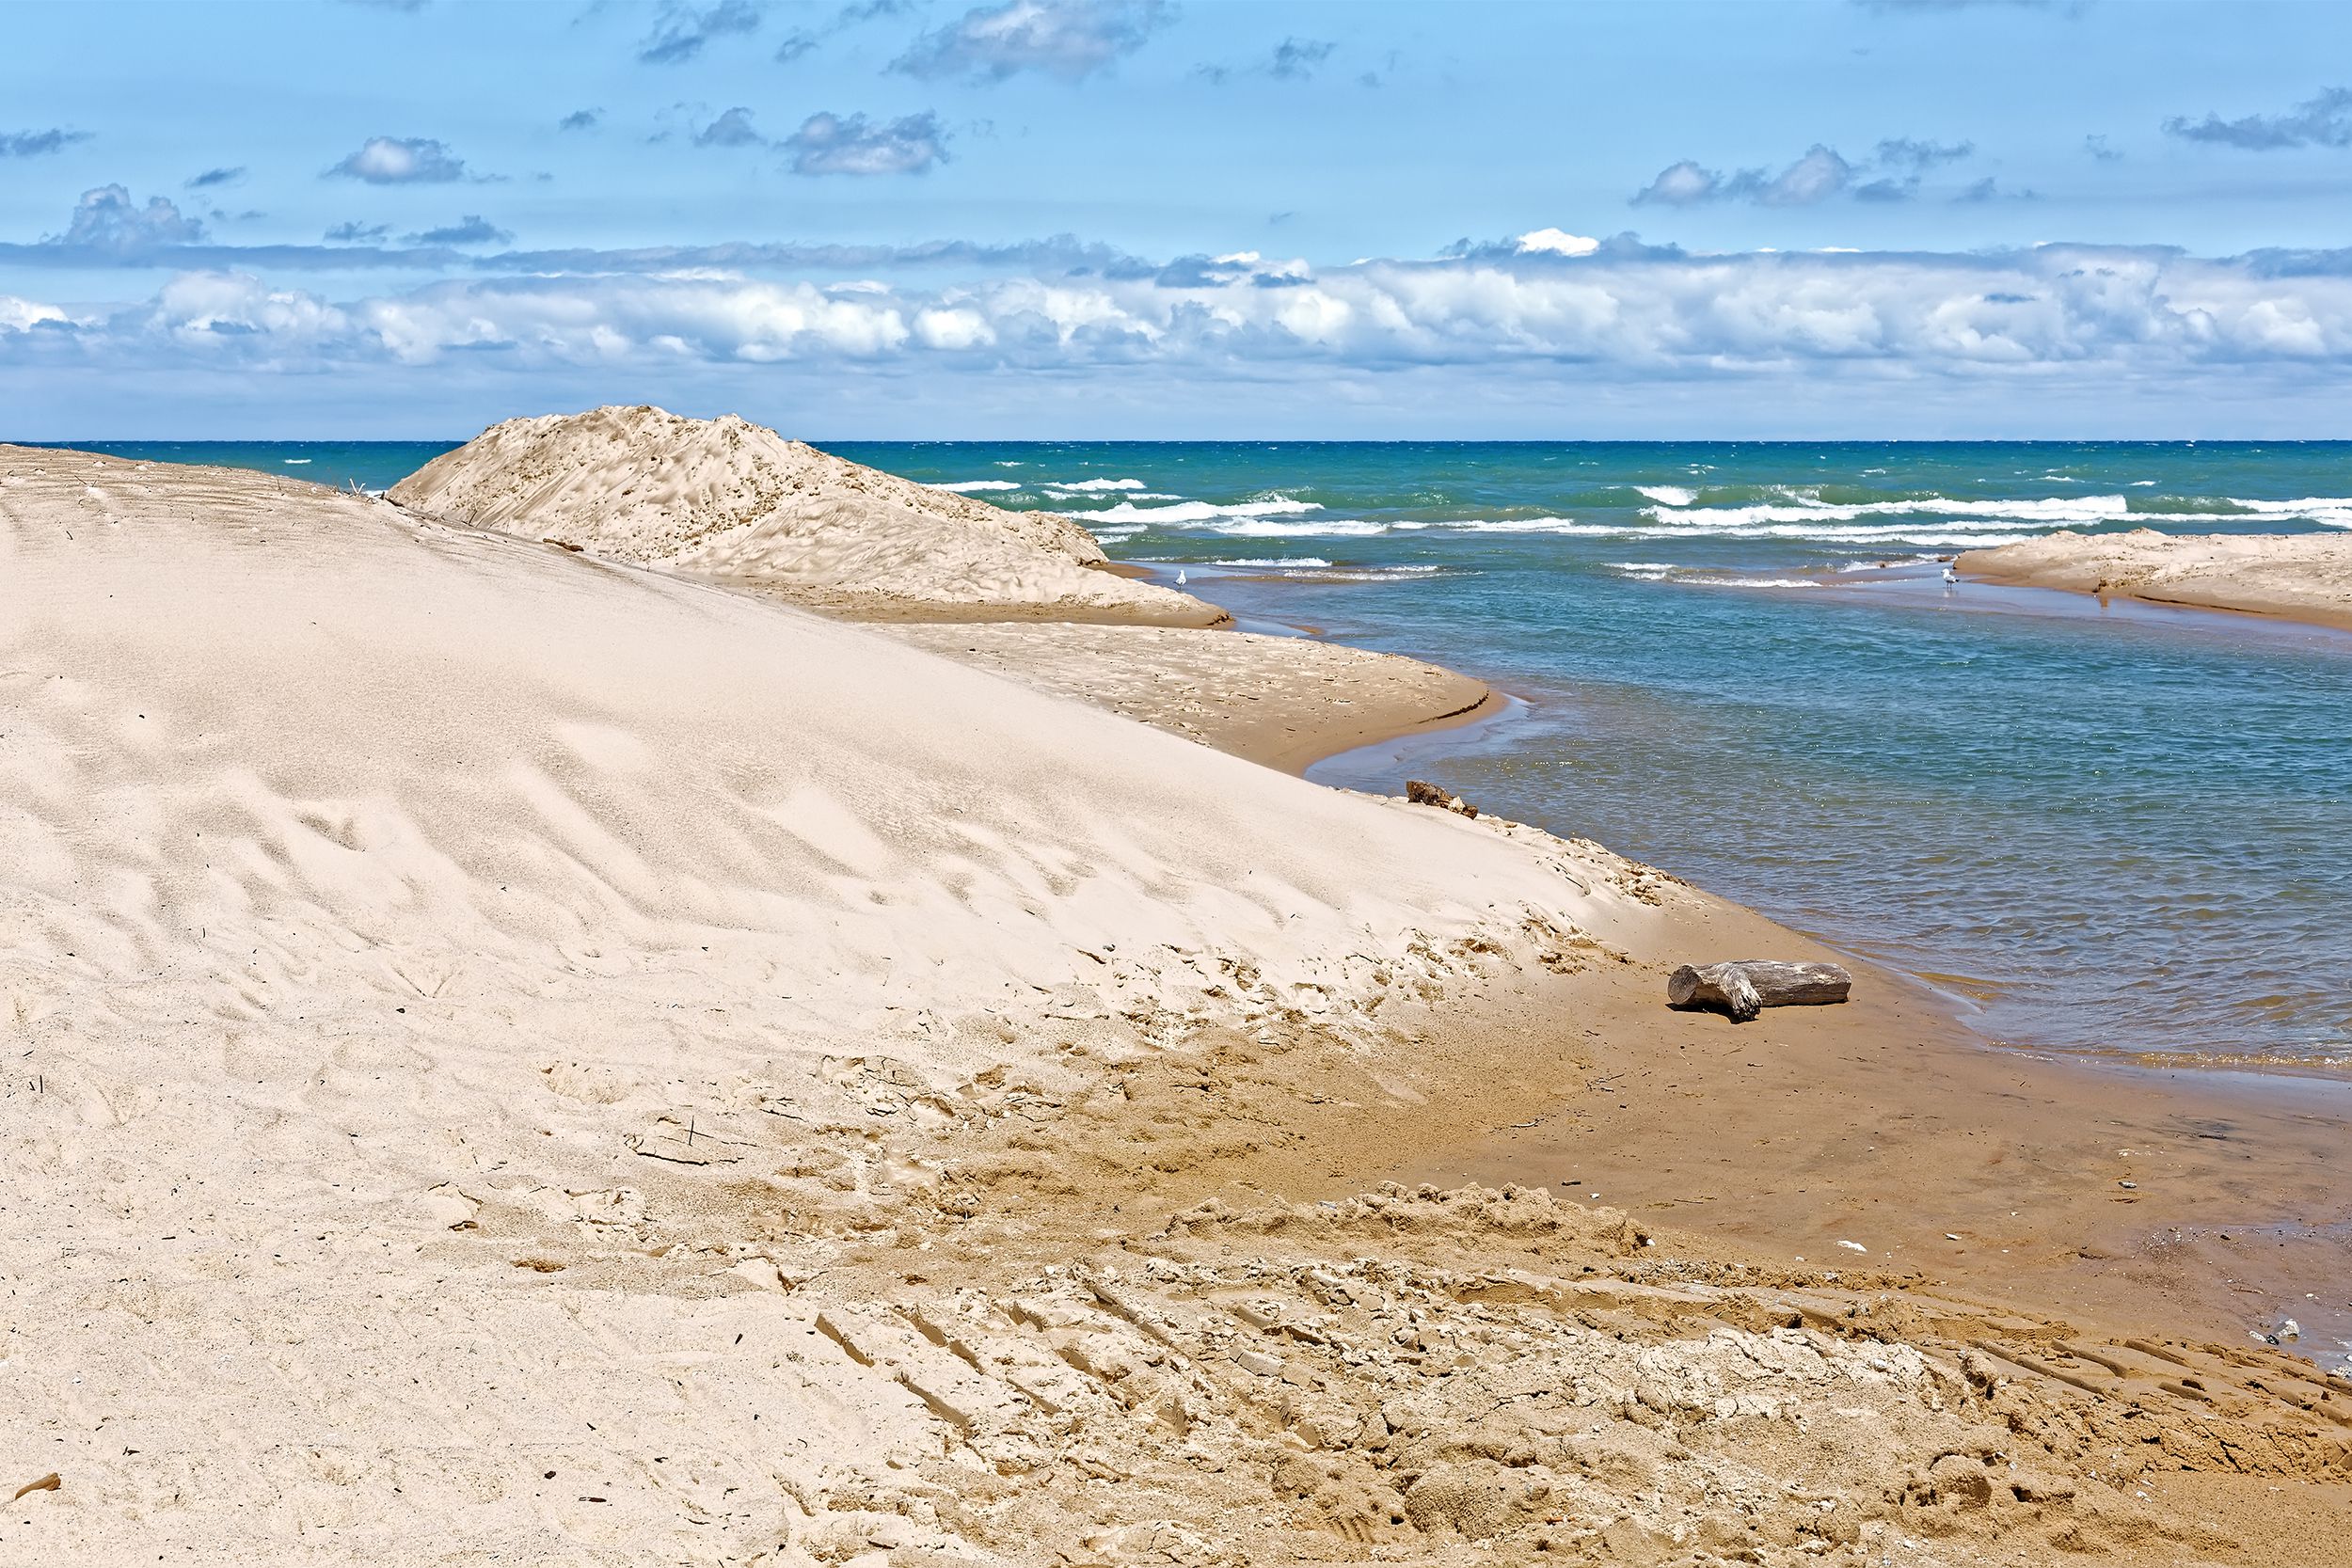 <p>A natural wonder created by glacial sand from the east and west sides of a 300-mile Lake Michigan, the Indiana Dunes have been carved over time by wind and waves nearly as powerful as those generated by an ocean. The <a href="https://www.nps.gov/indu/index.htm">15,000-acre park</a> is home to rare birds, sandy beach, and 50 miles of trails that wind through rugged dunes, wetlands, prairies, and forests. </p>